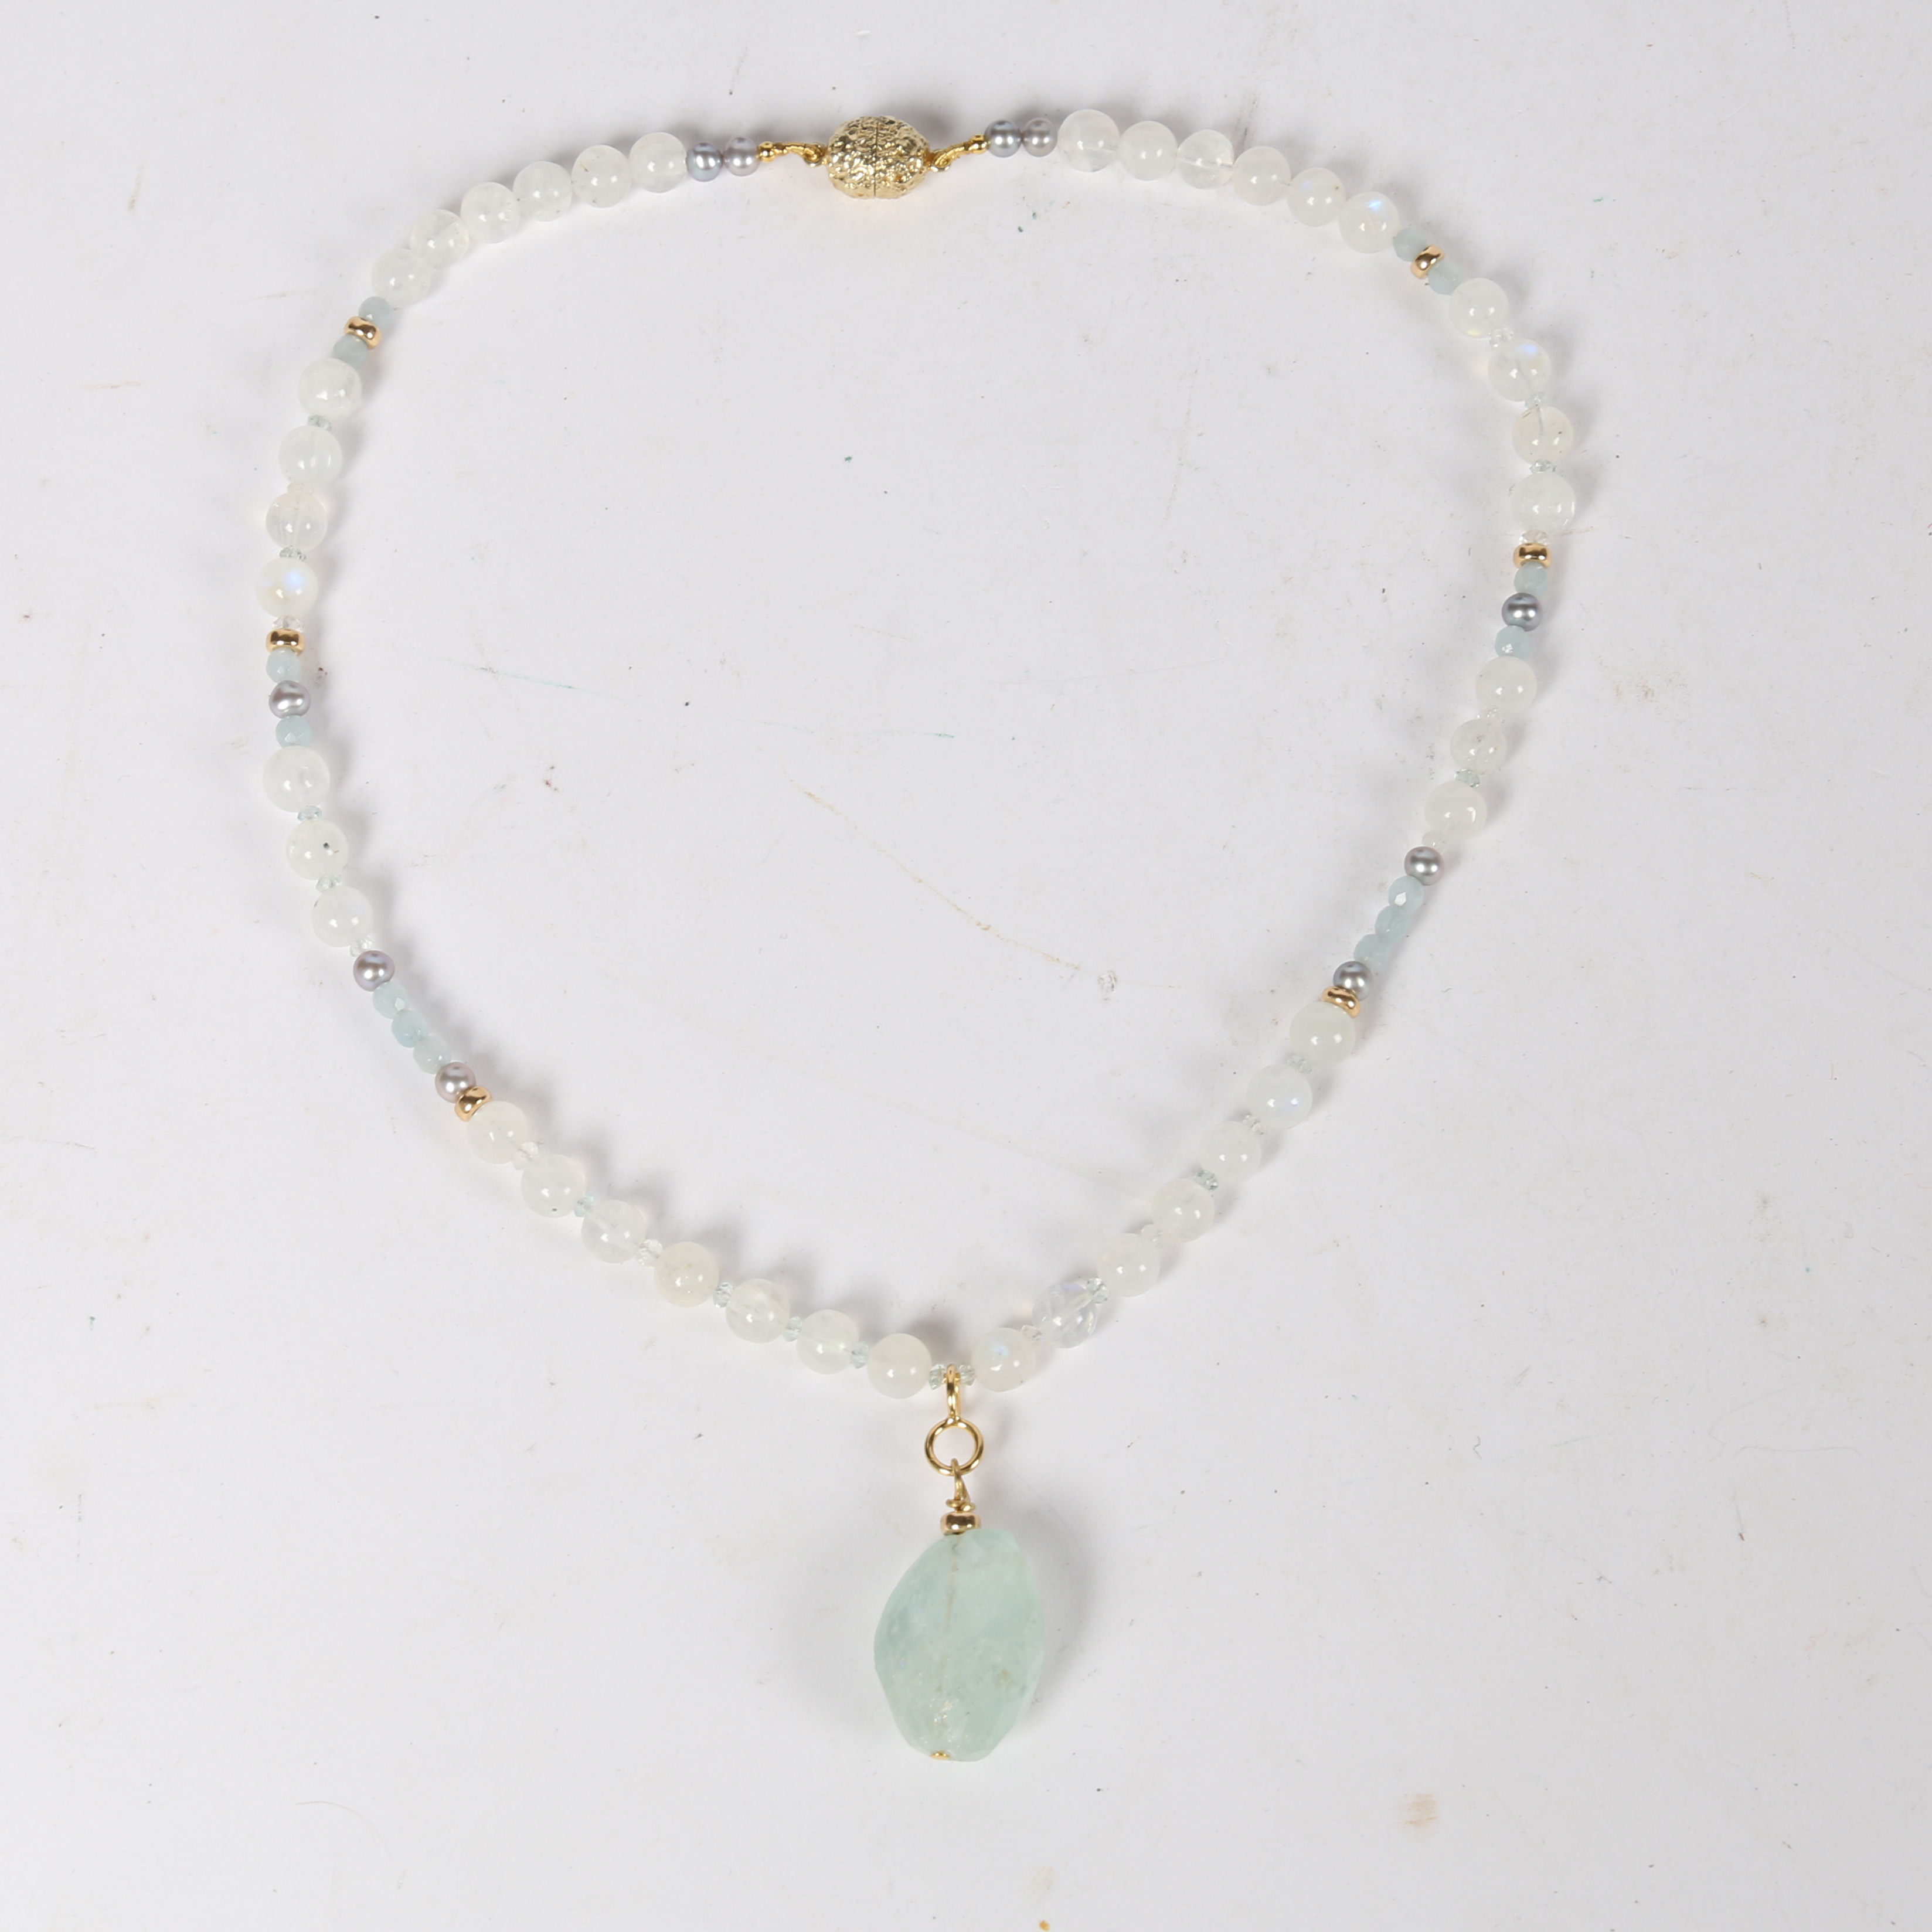 A UNIQUE ONE-OF-A-KIND MOONSTONE NECKLACE - Image 6 of 10